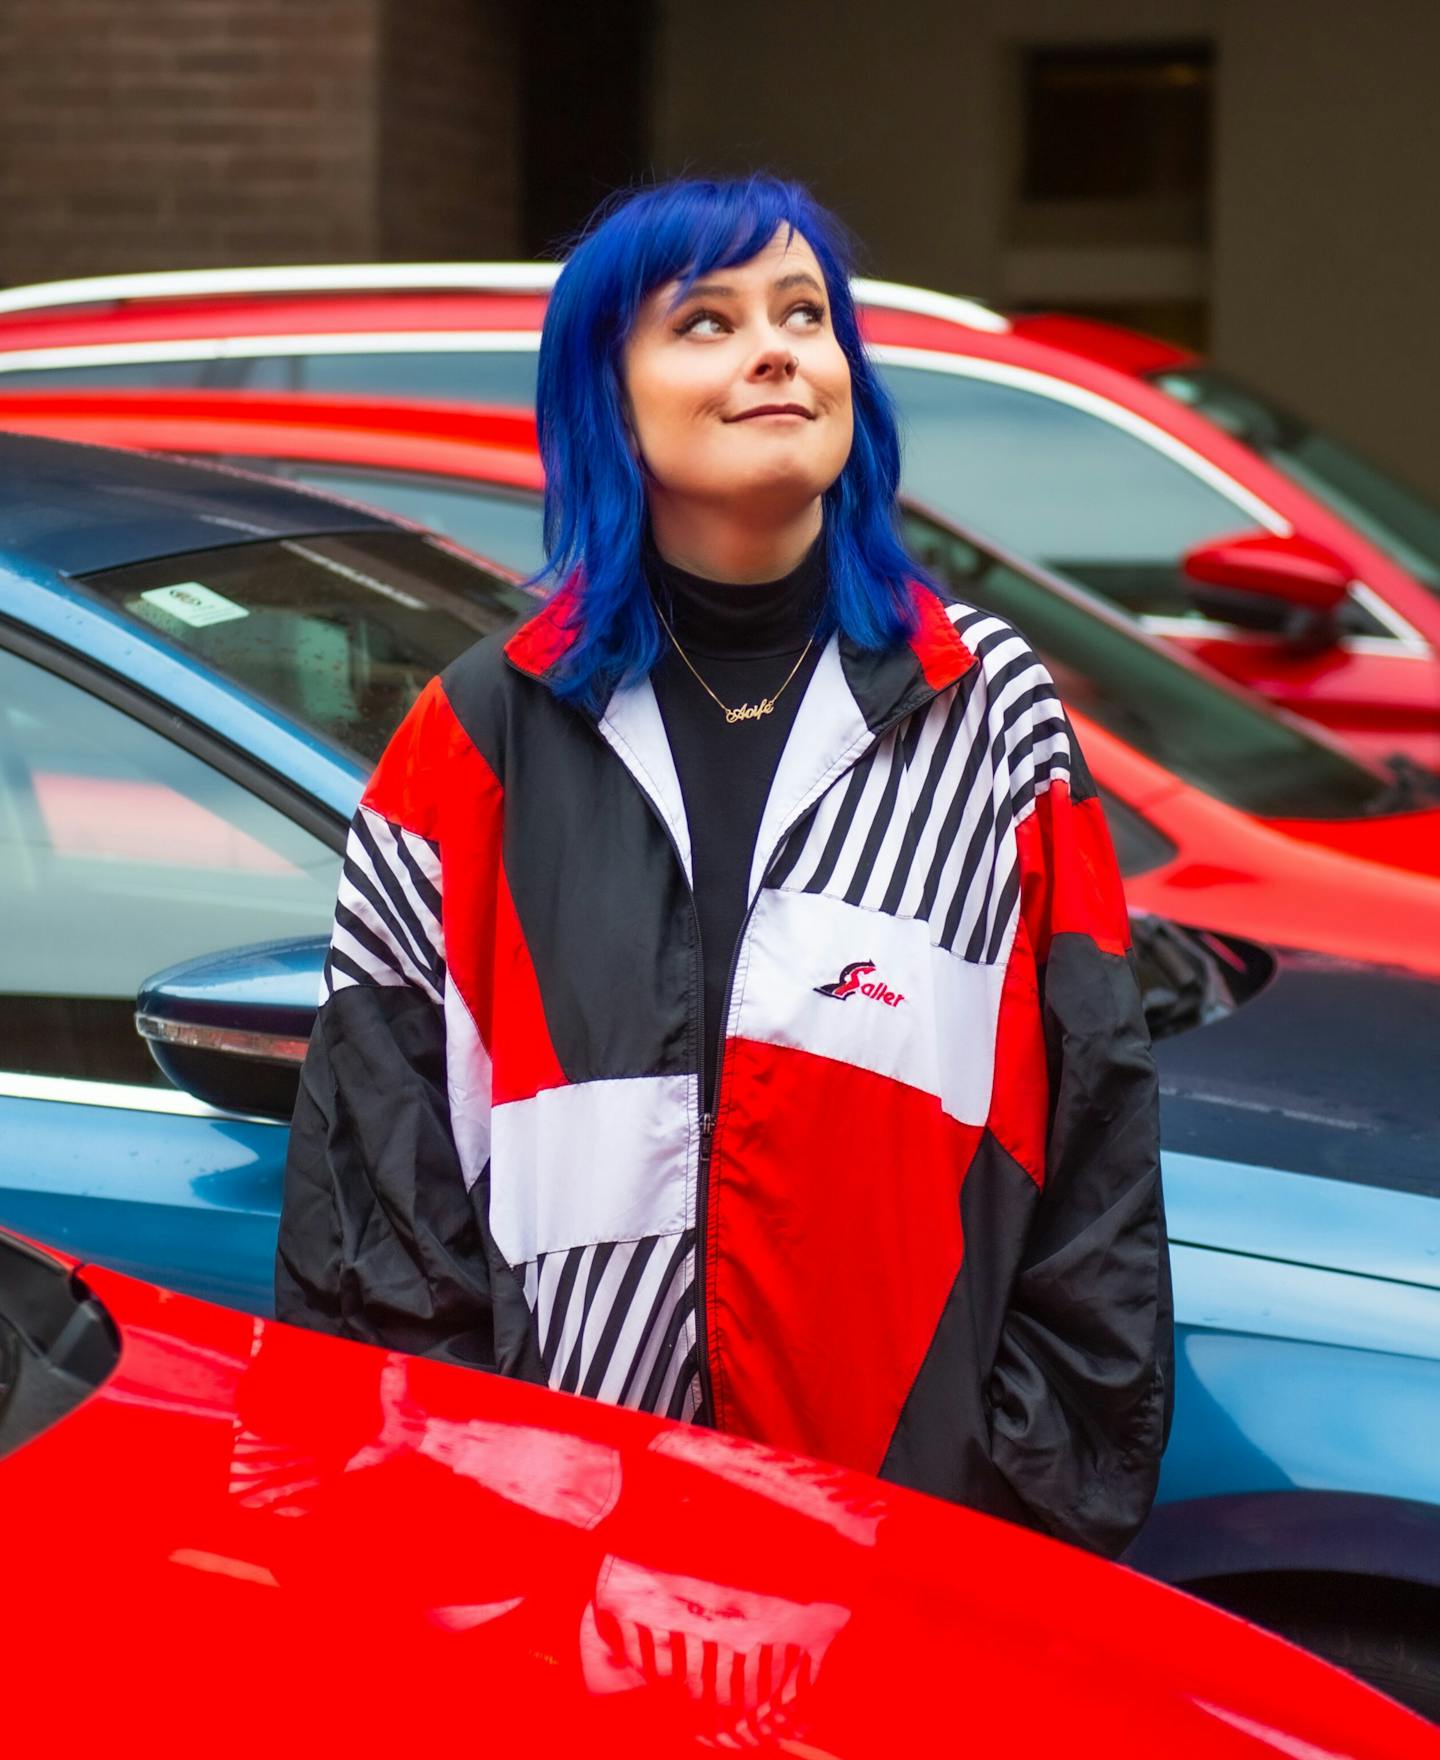 Aoife, a thirysomething white woman stands between a red car and a blue car. She has bright blue hair and is wearing a red, white and black sports jacket.\n\n